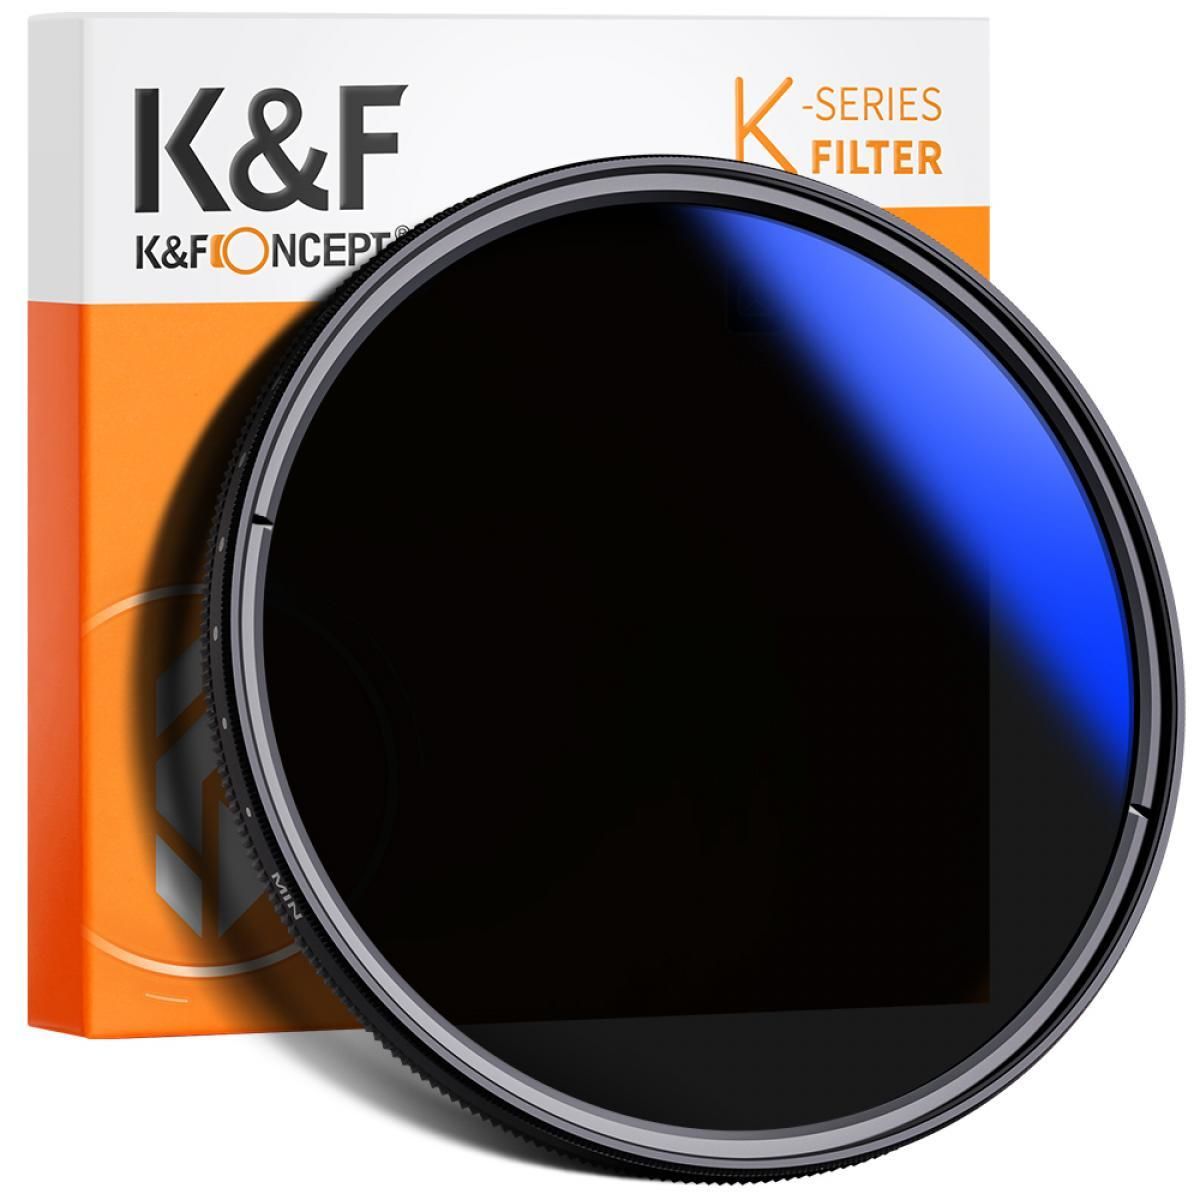 K&F Concept 82mm B-SERIES ND2-ND400 (1 ile 9 Stop) ND Filtre